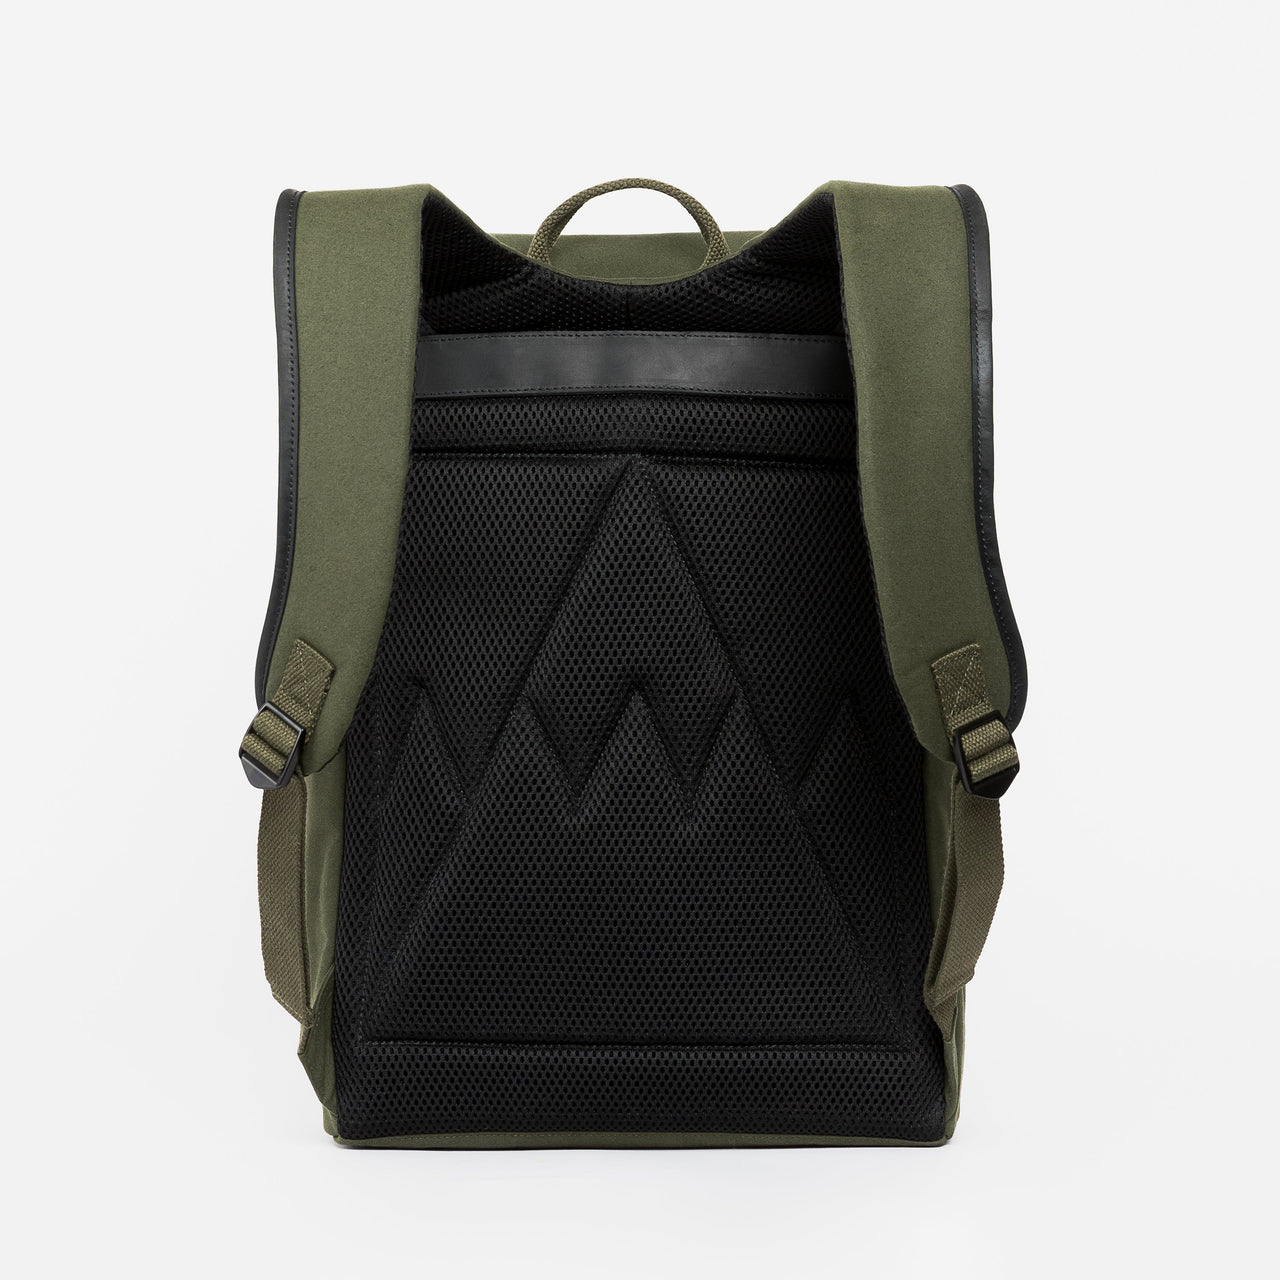 The Backpack in Olive green back view